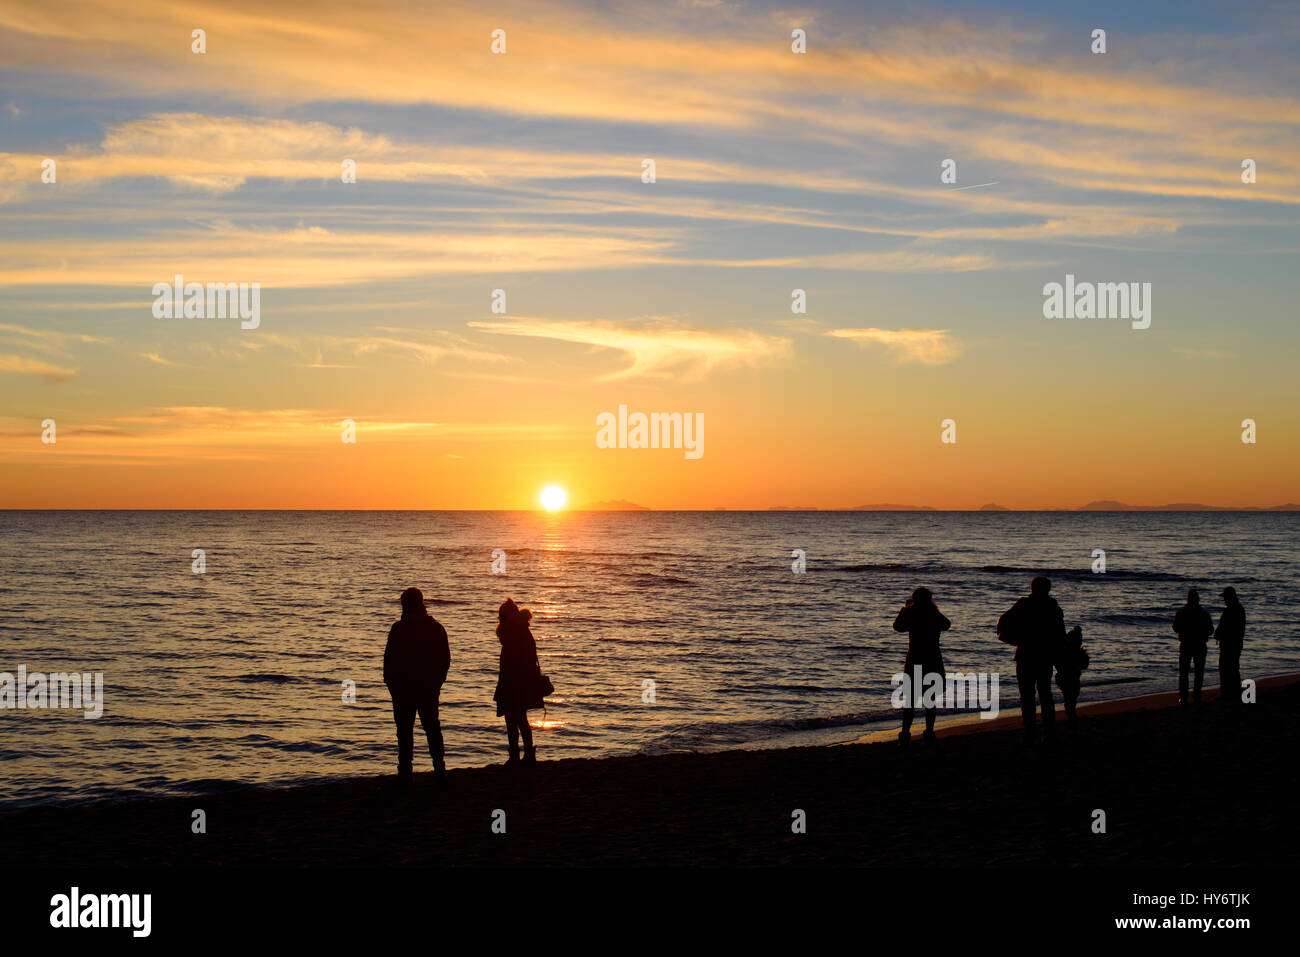 silhouette of people on the beach watching the sunset Stock Photo